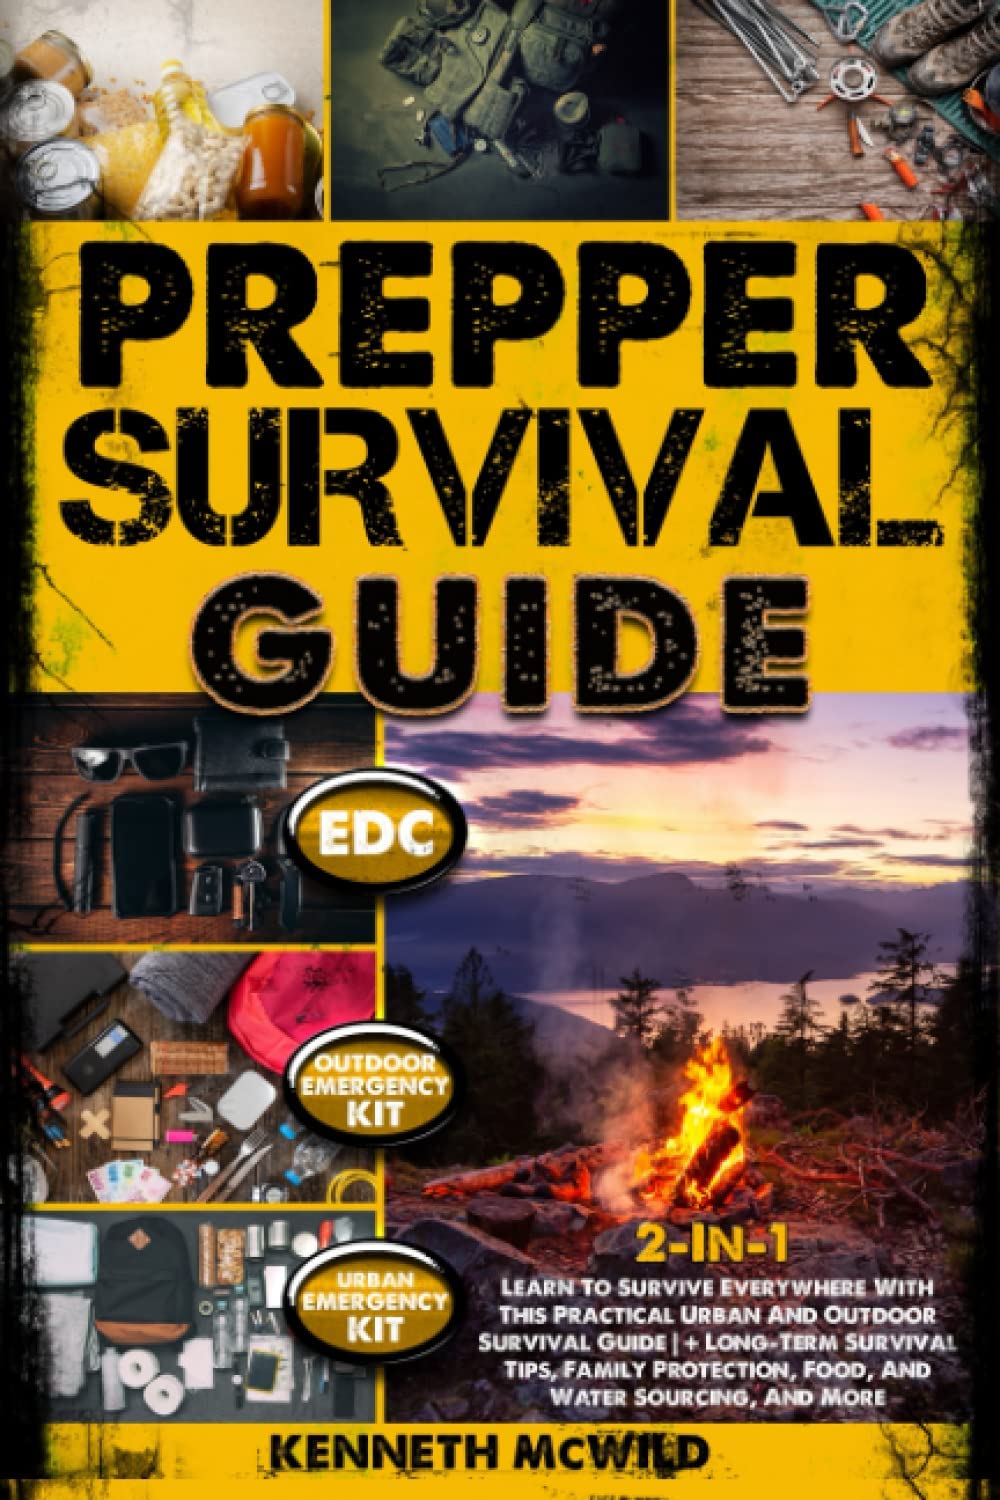 PREPPER SURVIVAL GUIDE: 2-In-1: Learn To Survive Everywhere With This Practical Urban And Outdoor Survival Guide | + Long-Term Survival Tips, Family Protection, Food, And Water Sourcing, And More